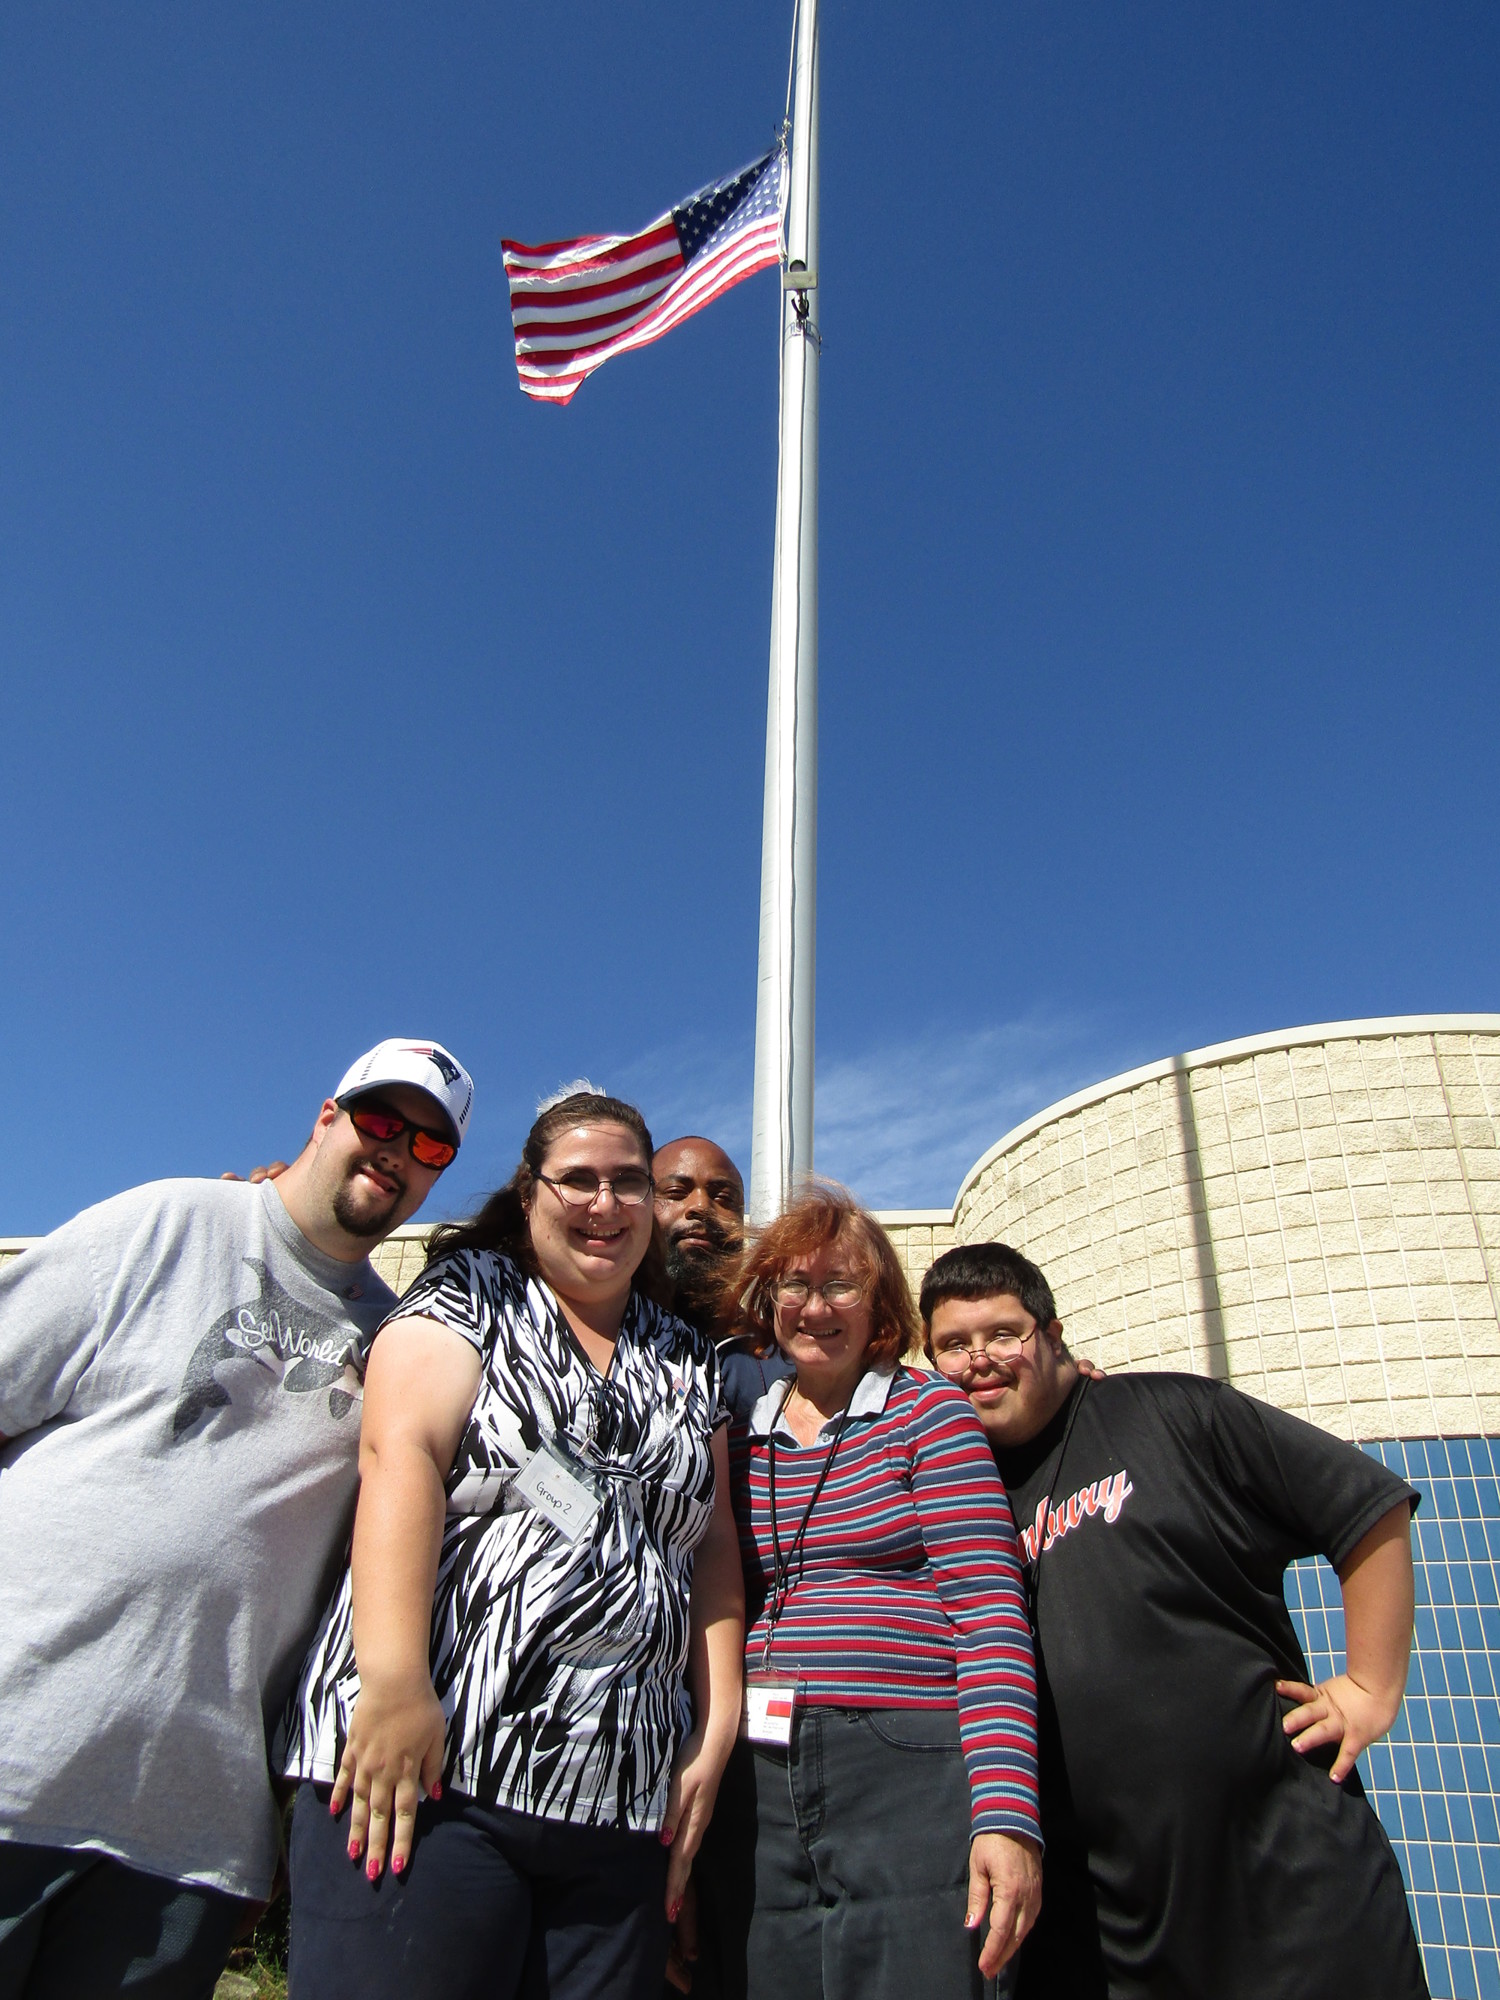 Flagler Technical Institute Ed Specialist David Evans (middle) stands with students Ethan Ward, Kristy Wilson, Diane Outlaw and Jonathan Vegerano, from the Step Up program, who make up the flag-raising team. Photo courtesy of FTI